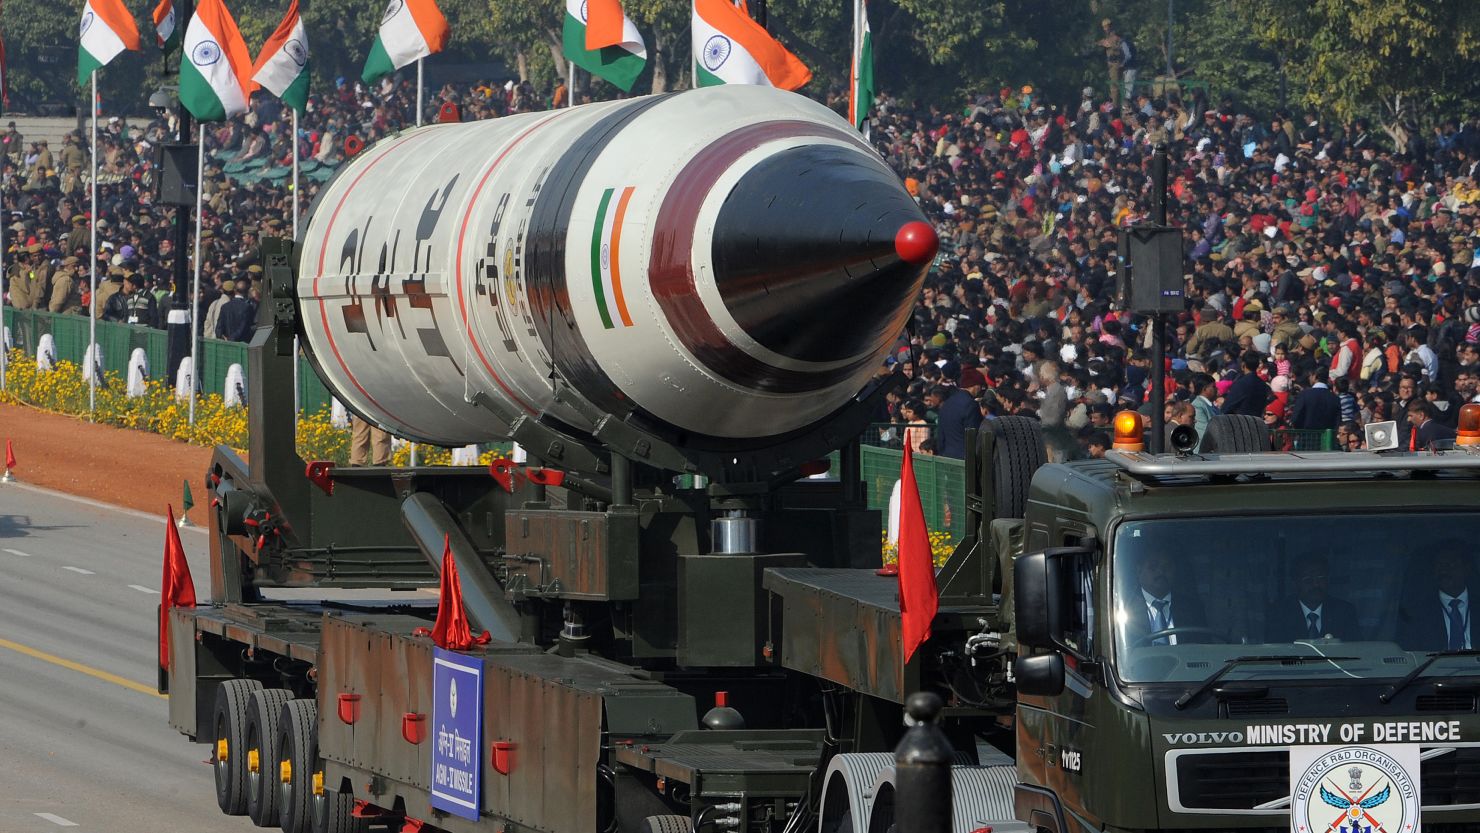 The Agni-V missile is displayed during India's Republic Day parade in New Delhi on January 26, 2013.